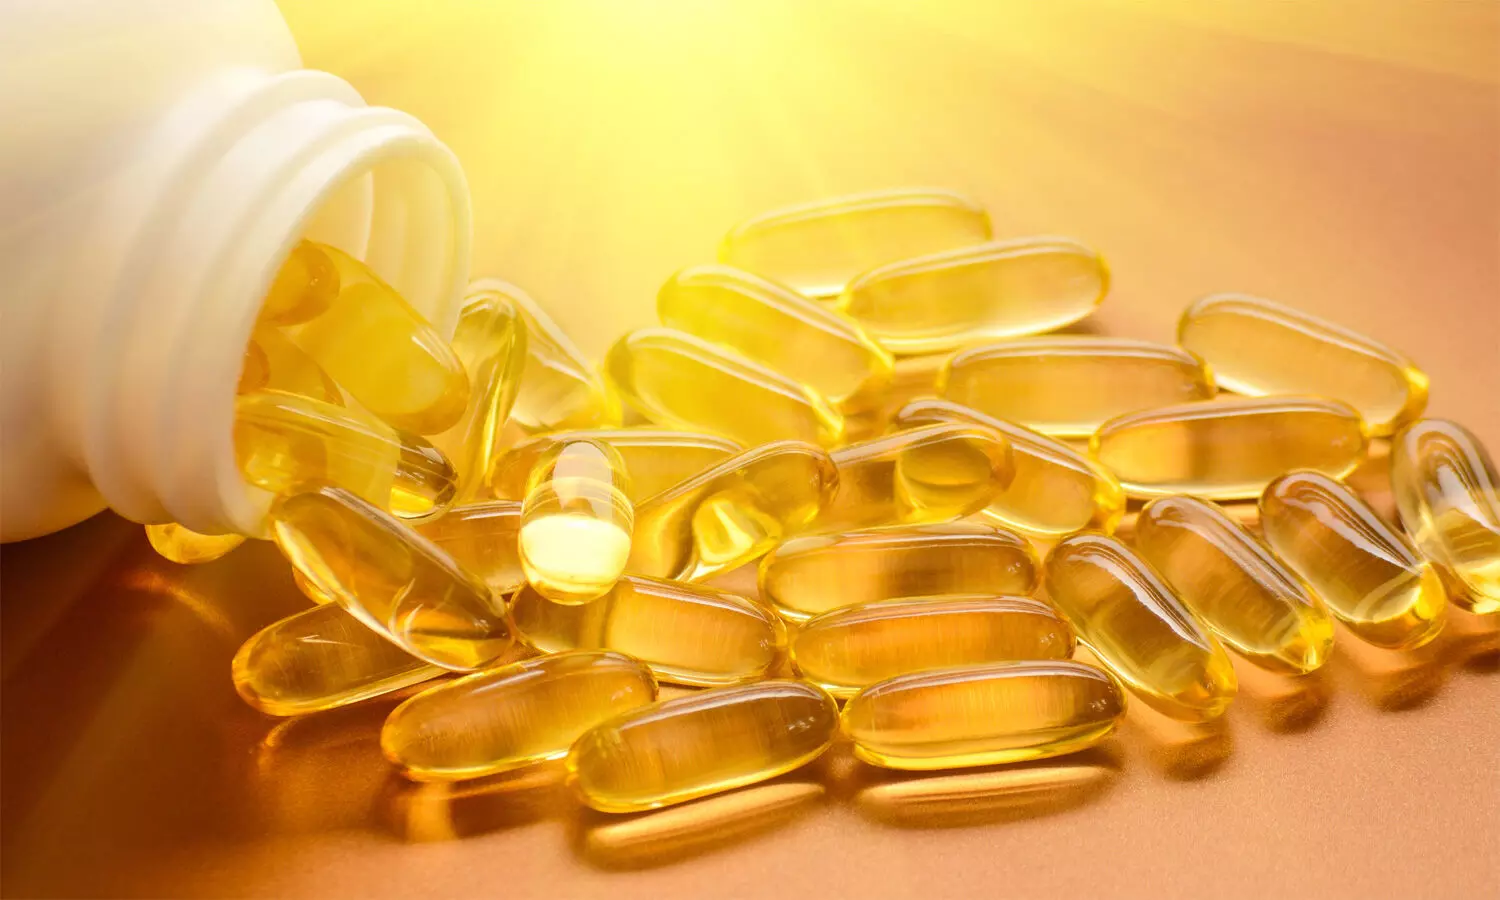 Vitamin D before surgery reduces hypocalcemia risk after thyroidectomy: Study